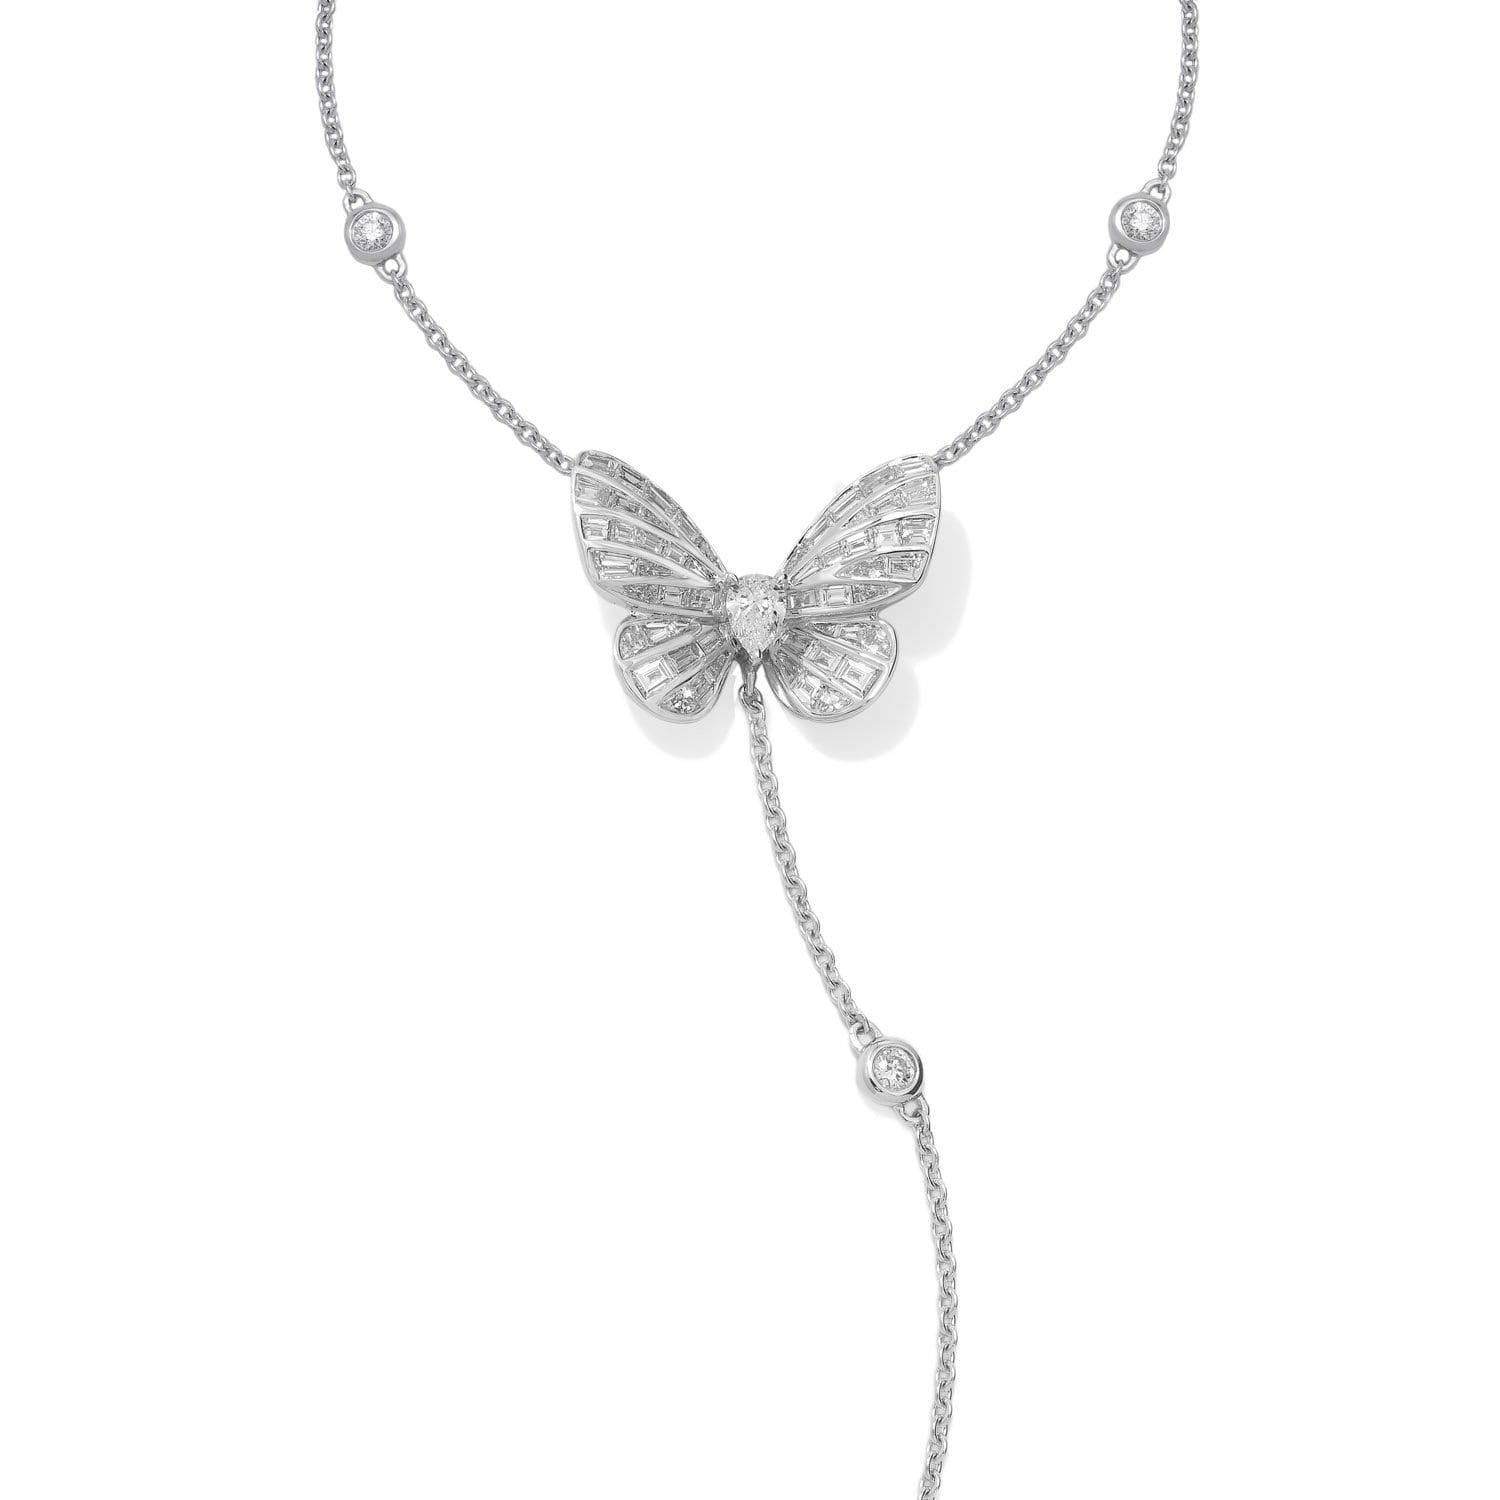 BUTTERFLY LOVERS All Diamond Necklace